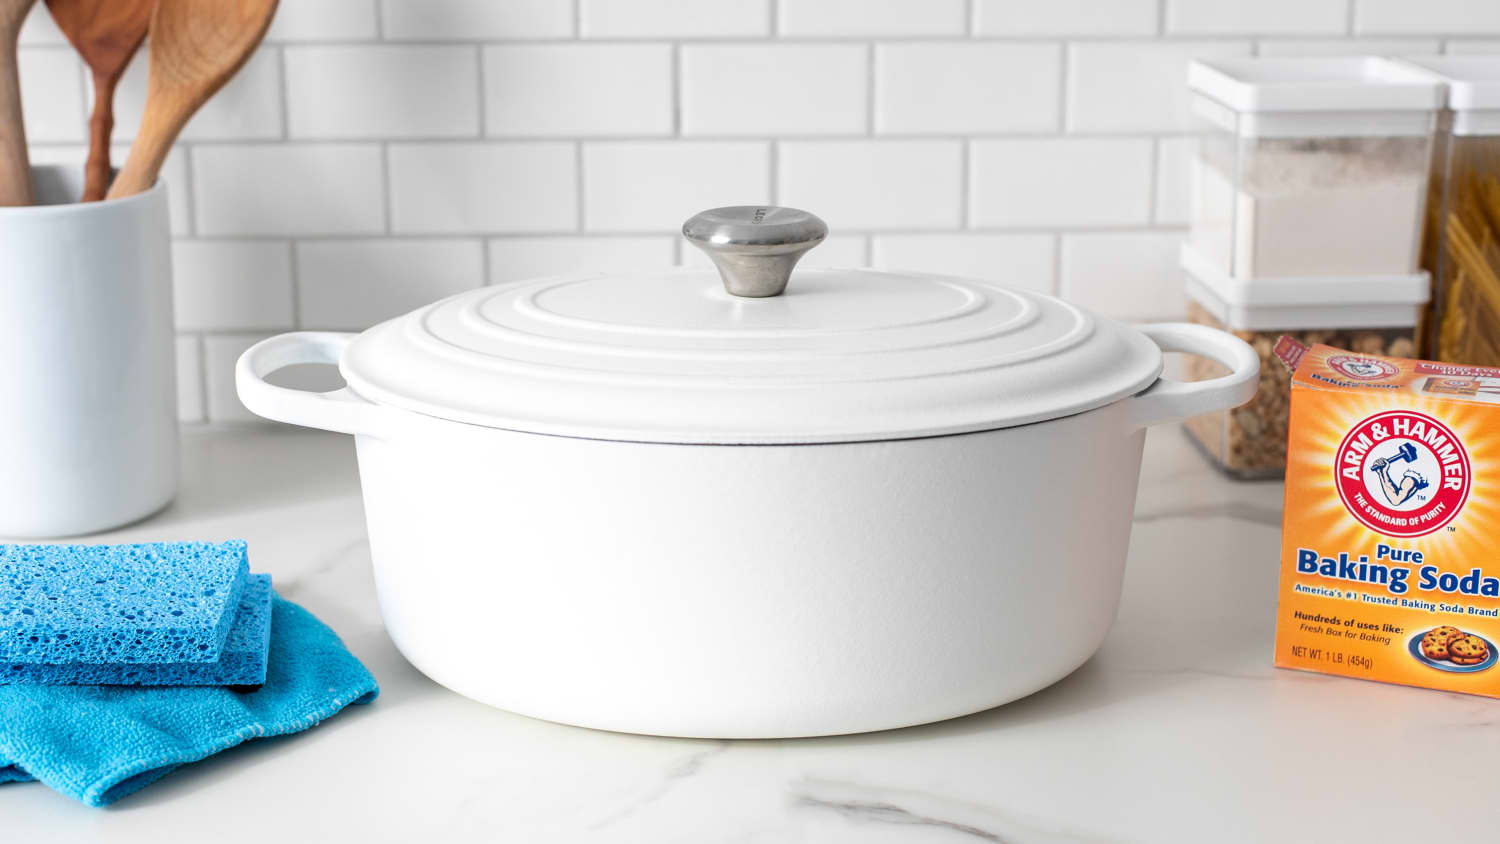 A Simple and Effective Way to Clean Burnt Le Creuset Dutch Oven